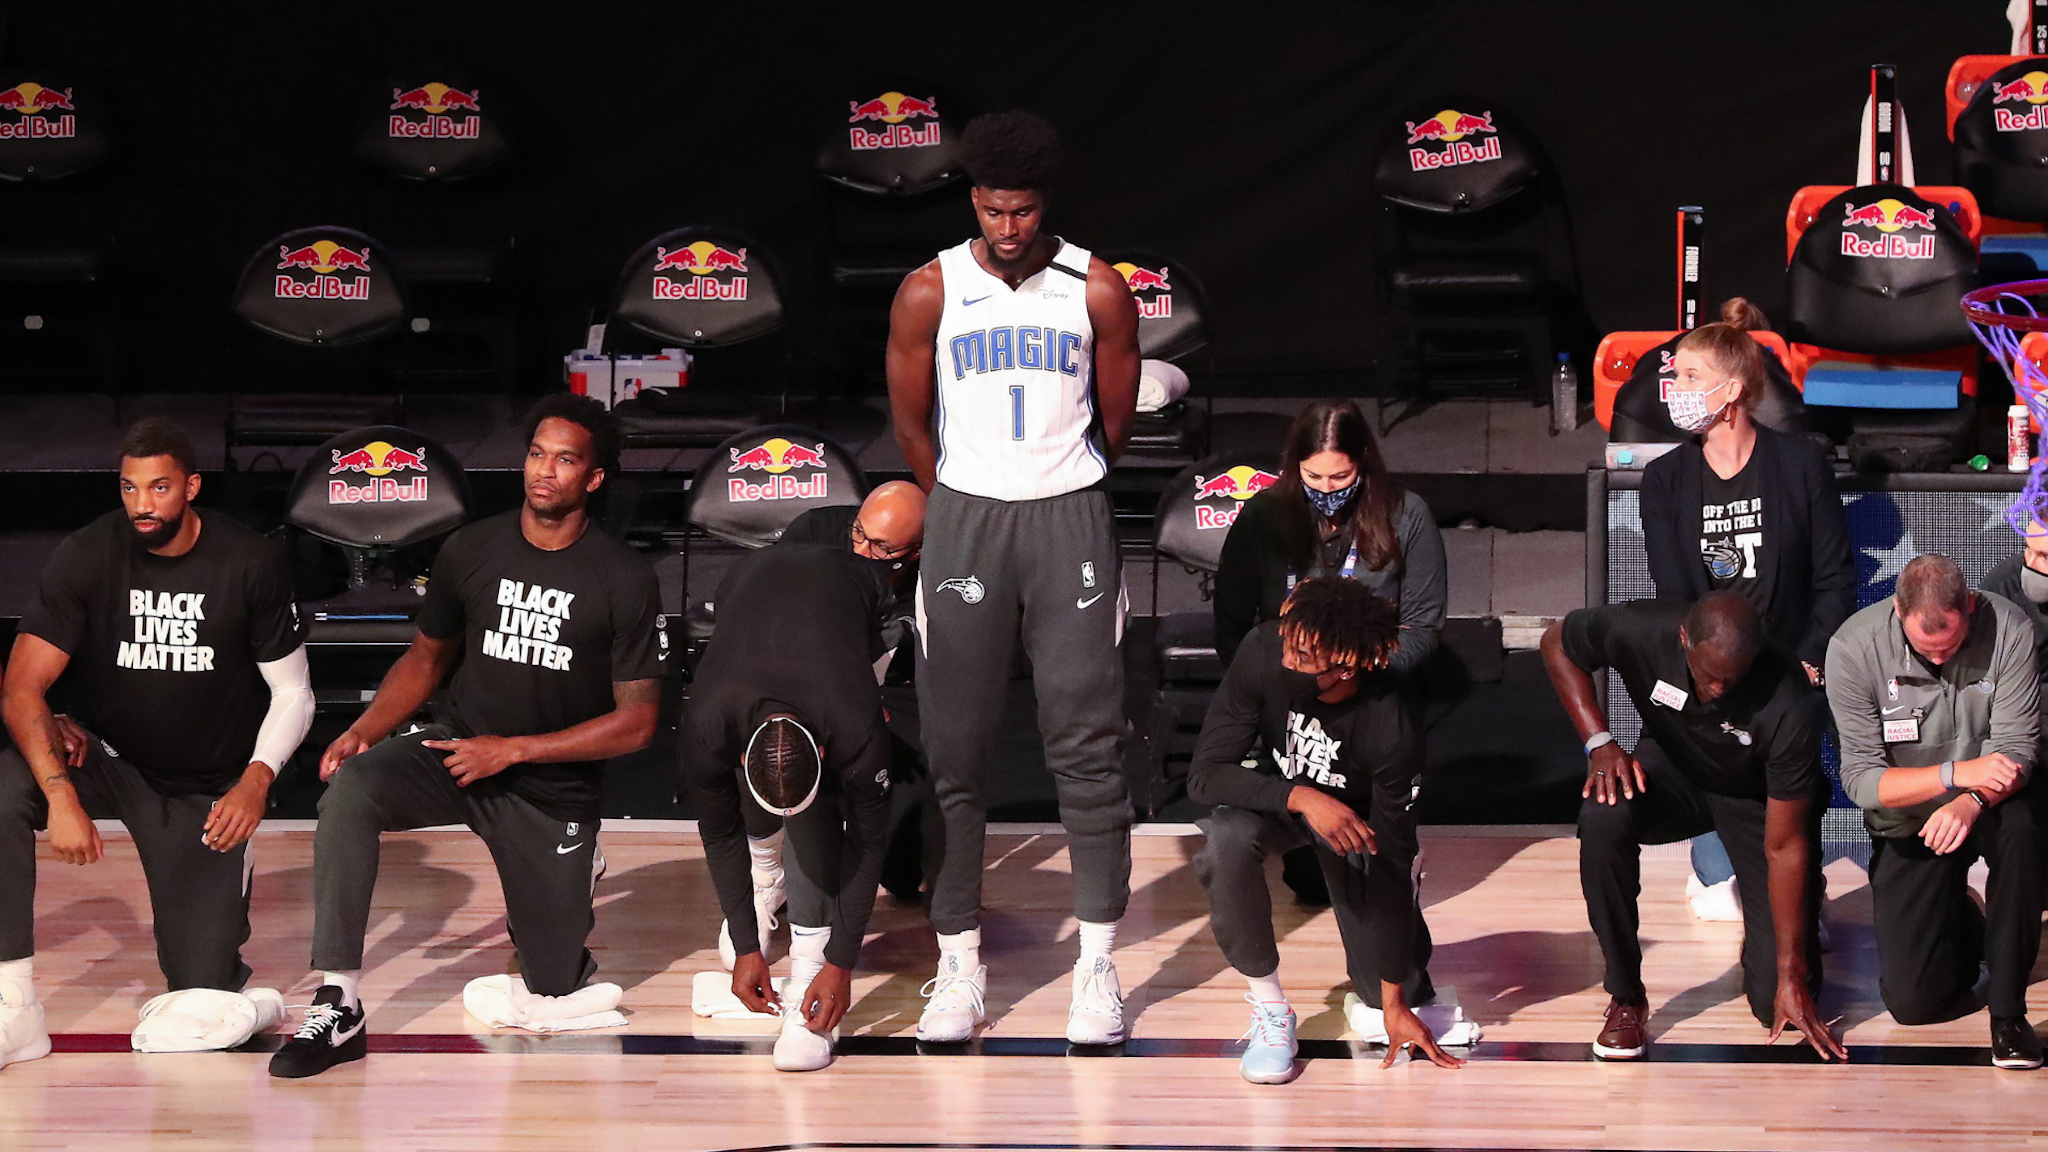 Orlando Magic forward Jonathan Isaac (1) is the lone player to stand and not wear a "Black Lives Matter" t-shirt prior to a game against the Brooklyn Nets at Disney's Wide World of Sports' HP Field House in Lake Buena Vista, Florida, on Friday, July 31, 2020.